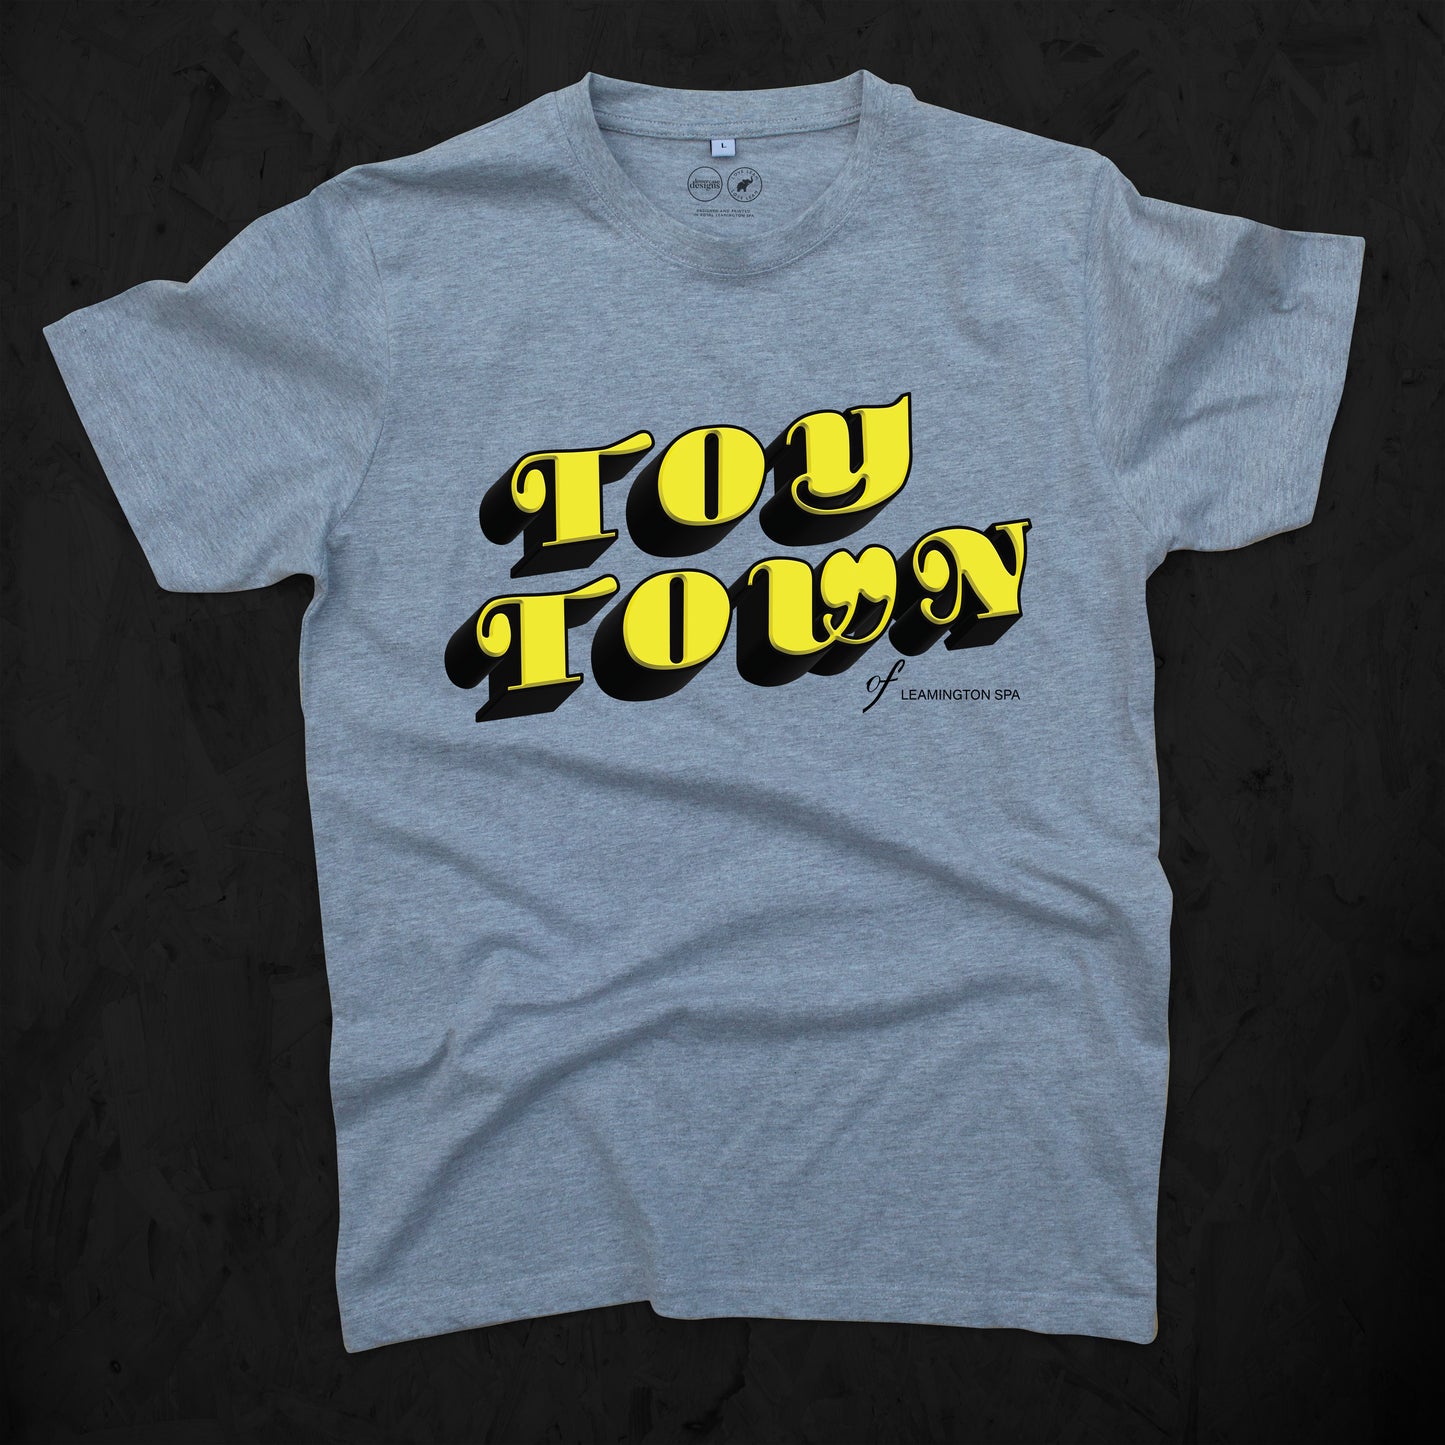 Toy Town 2 Tee Child's sizes 3-14 years